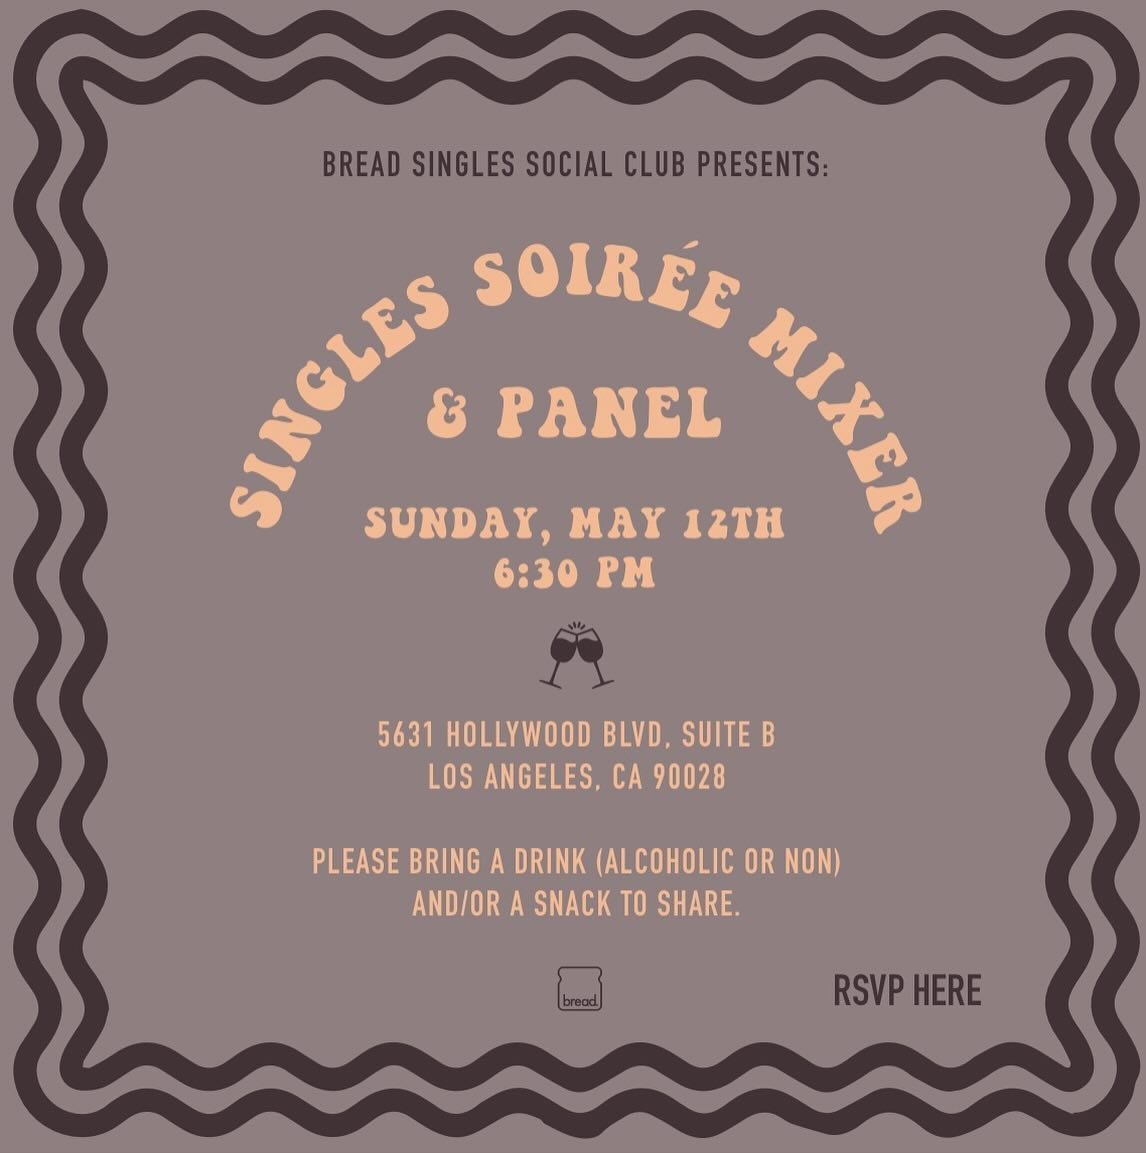 MIXER AT THE OFFICE 🎛️🥂
&mdash; 
Sunday, May 12th, @ 6:30pm - The bread singles social club is putting on a soir&eacute;e mixer and panel!

The night will start off with a panel of men and women who will answer some of your burning dating questions